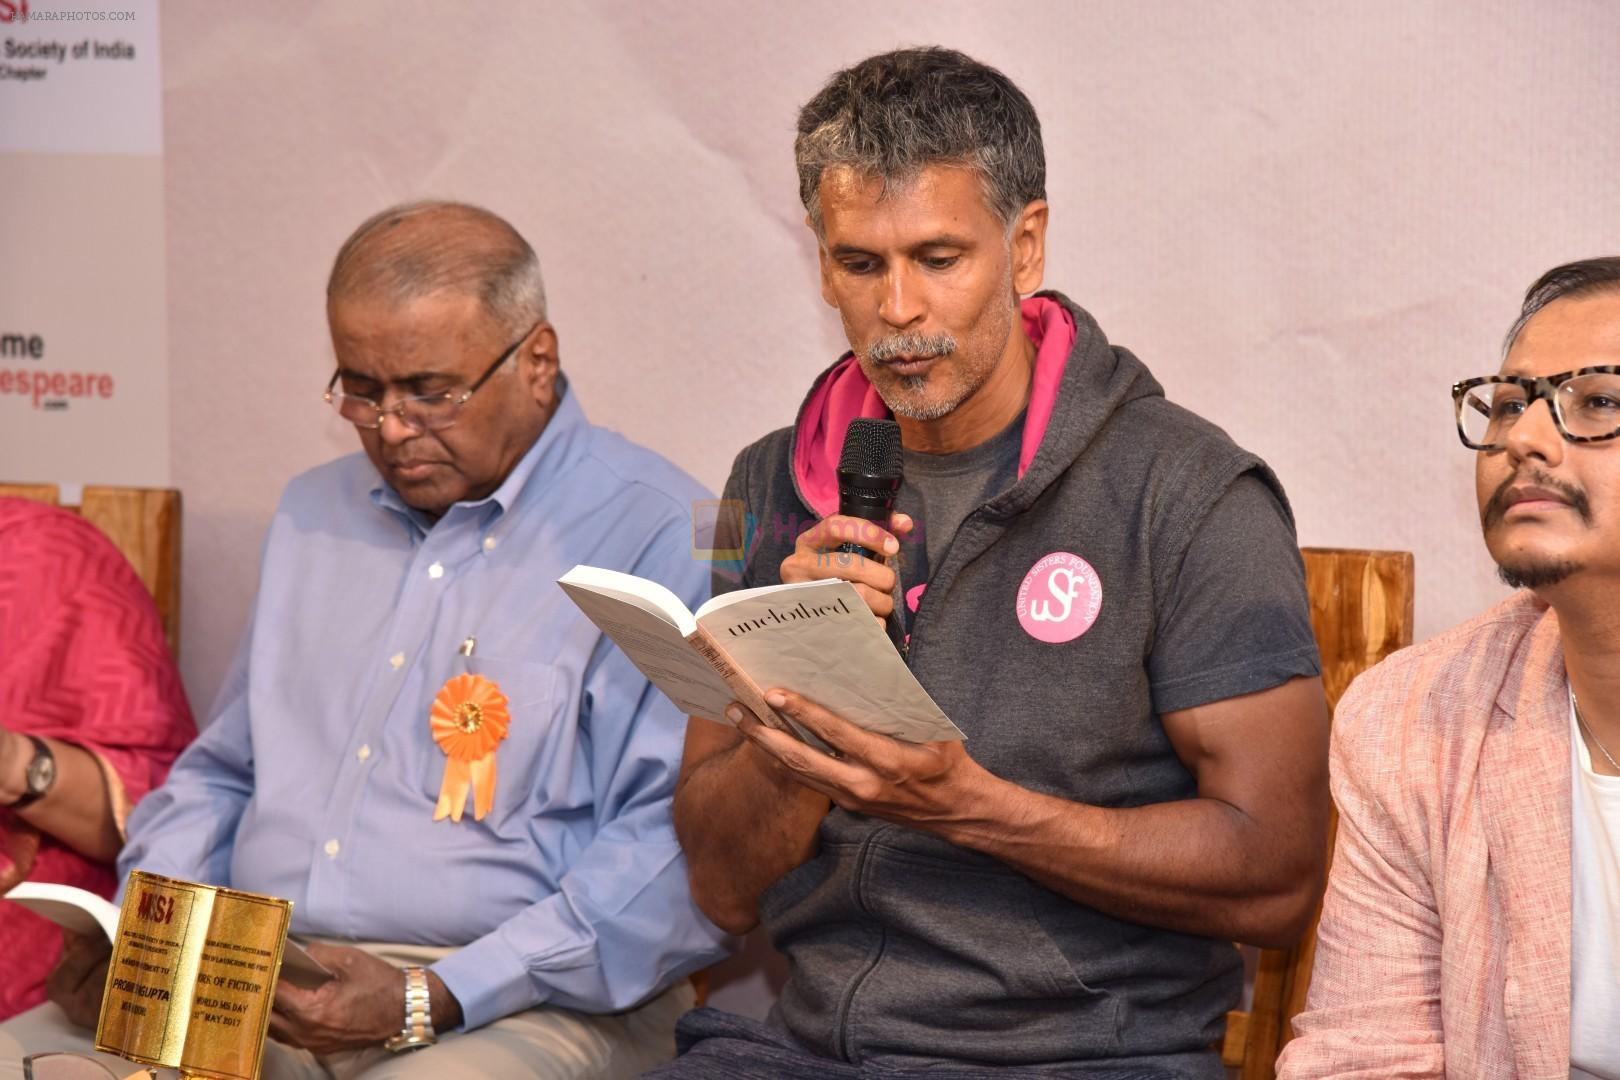 Milind Soman Launches Probir Sengupta's Debut Book Unclothed on 31st May 2017